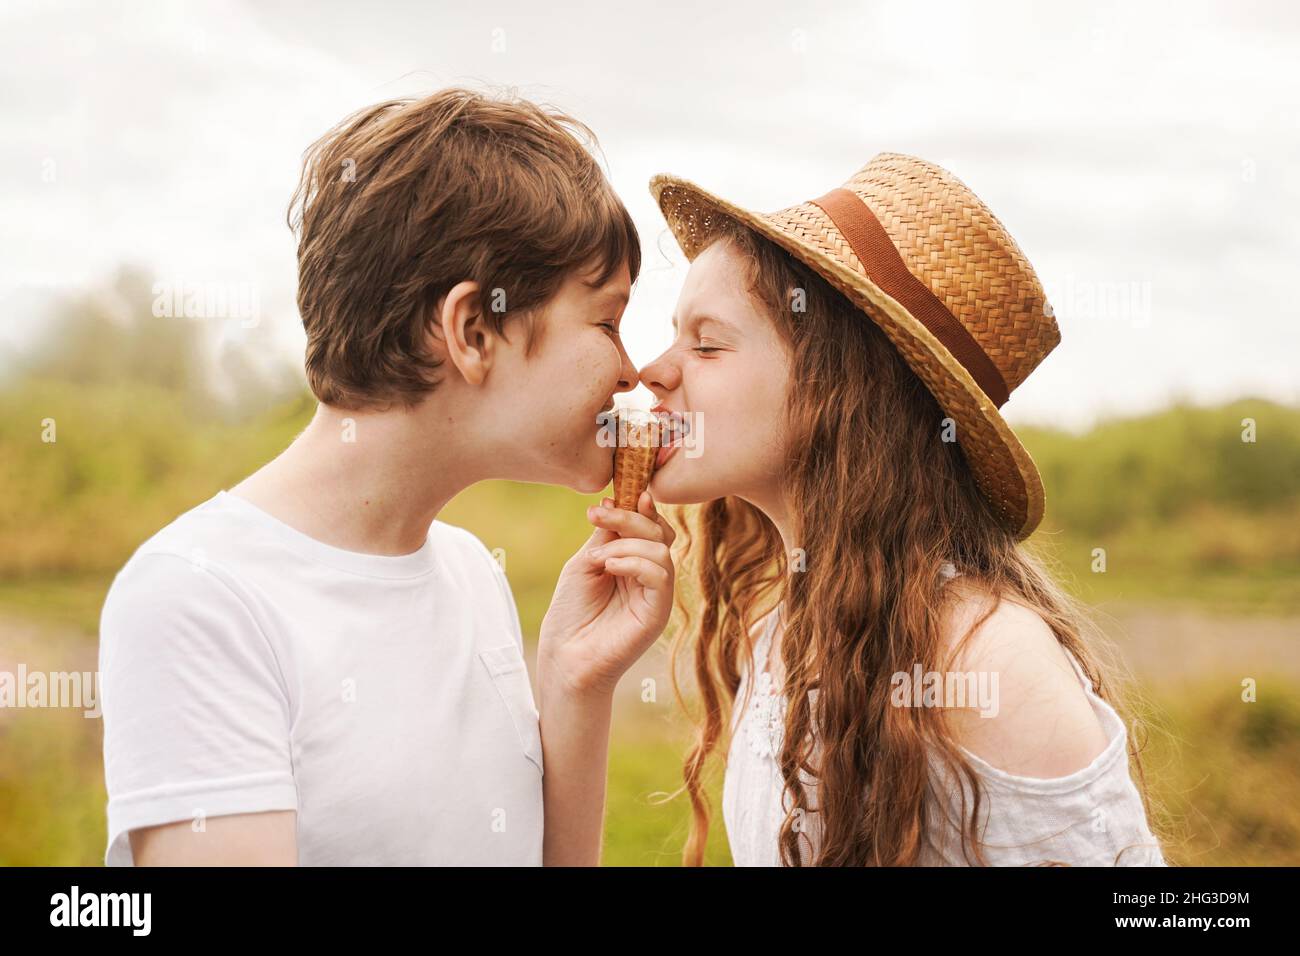 Children eat ice cream outdoors. Brothers and sister laugh and eat ice cream in the village in summer. Stock Photo